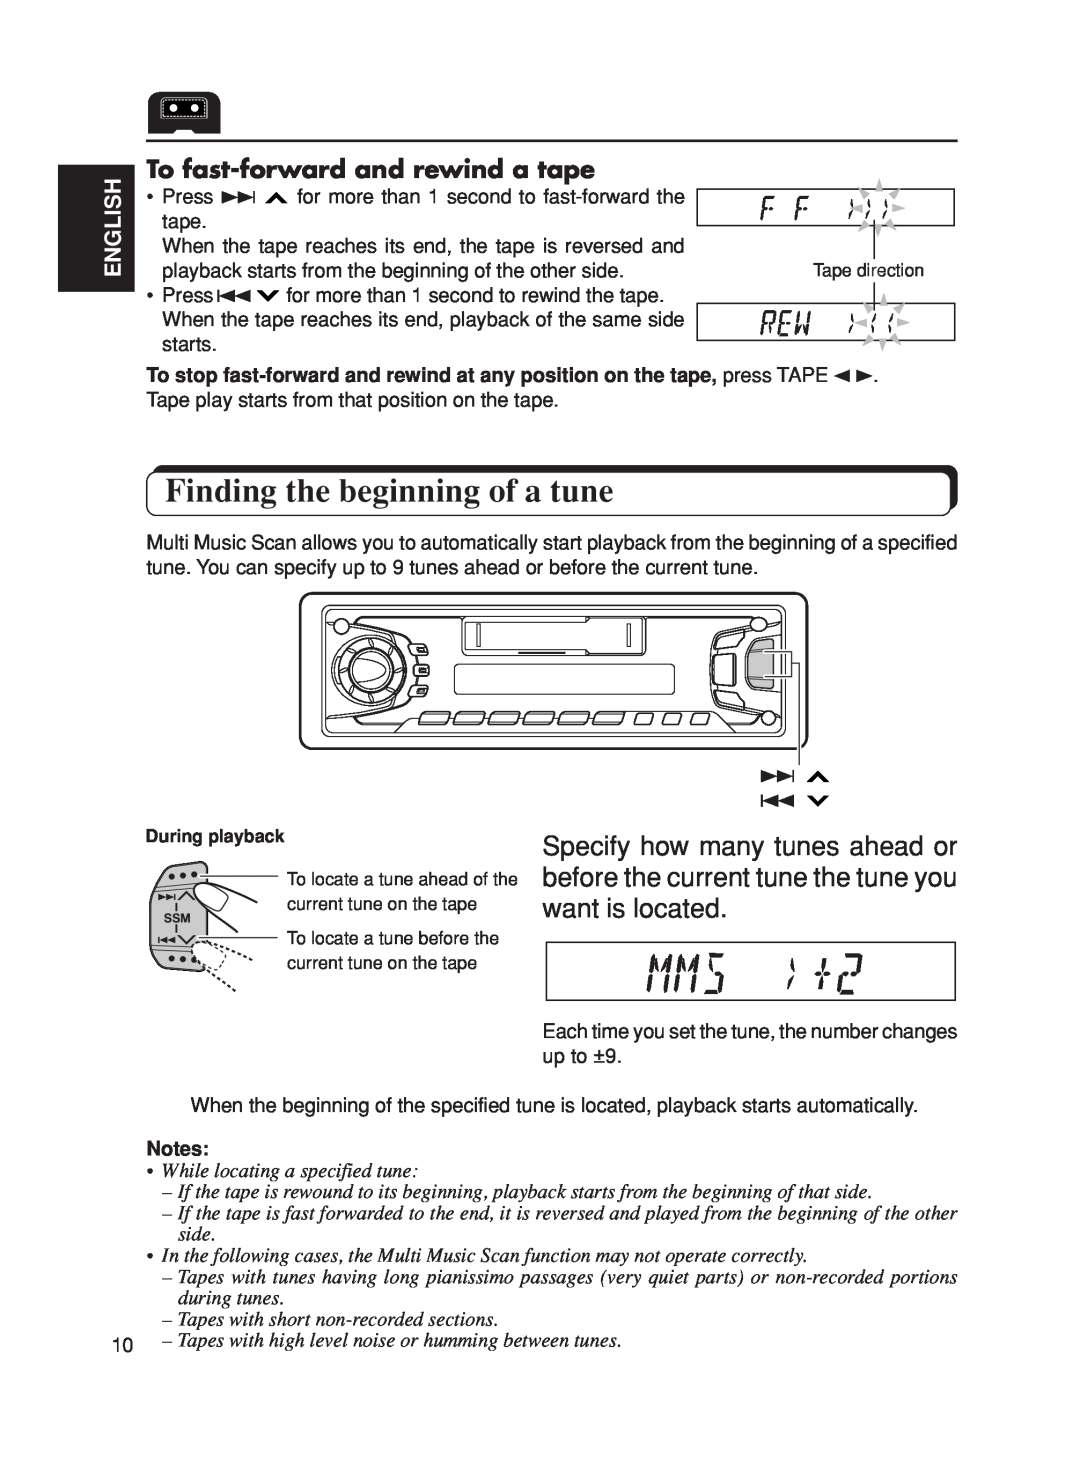 JVC KS-FX270 manual Finding the beginning of a tune, To fast-forwardand rewind a tape, English 